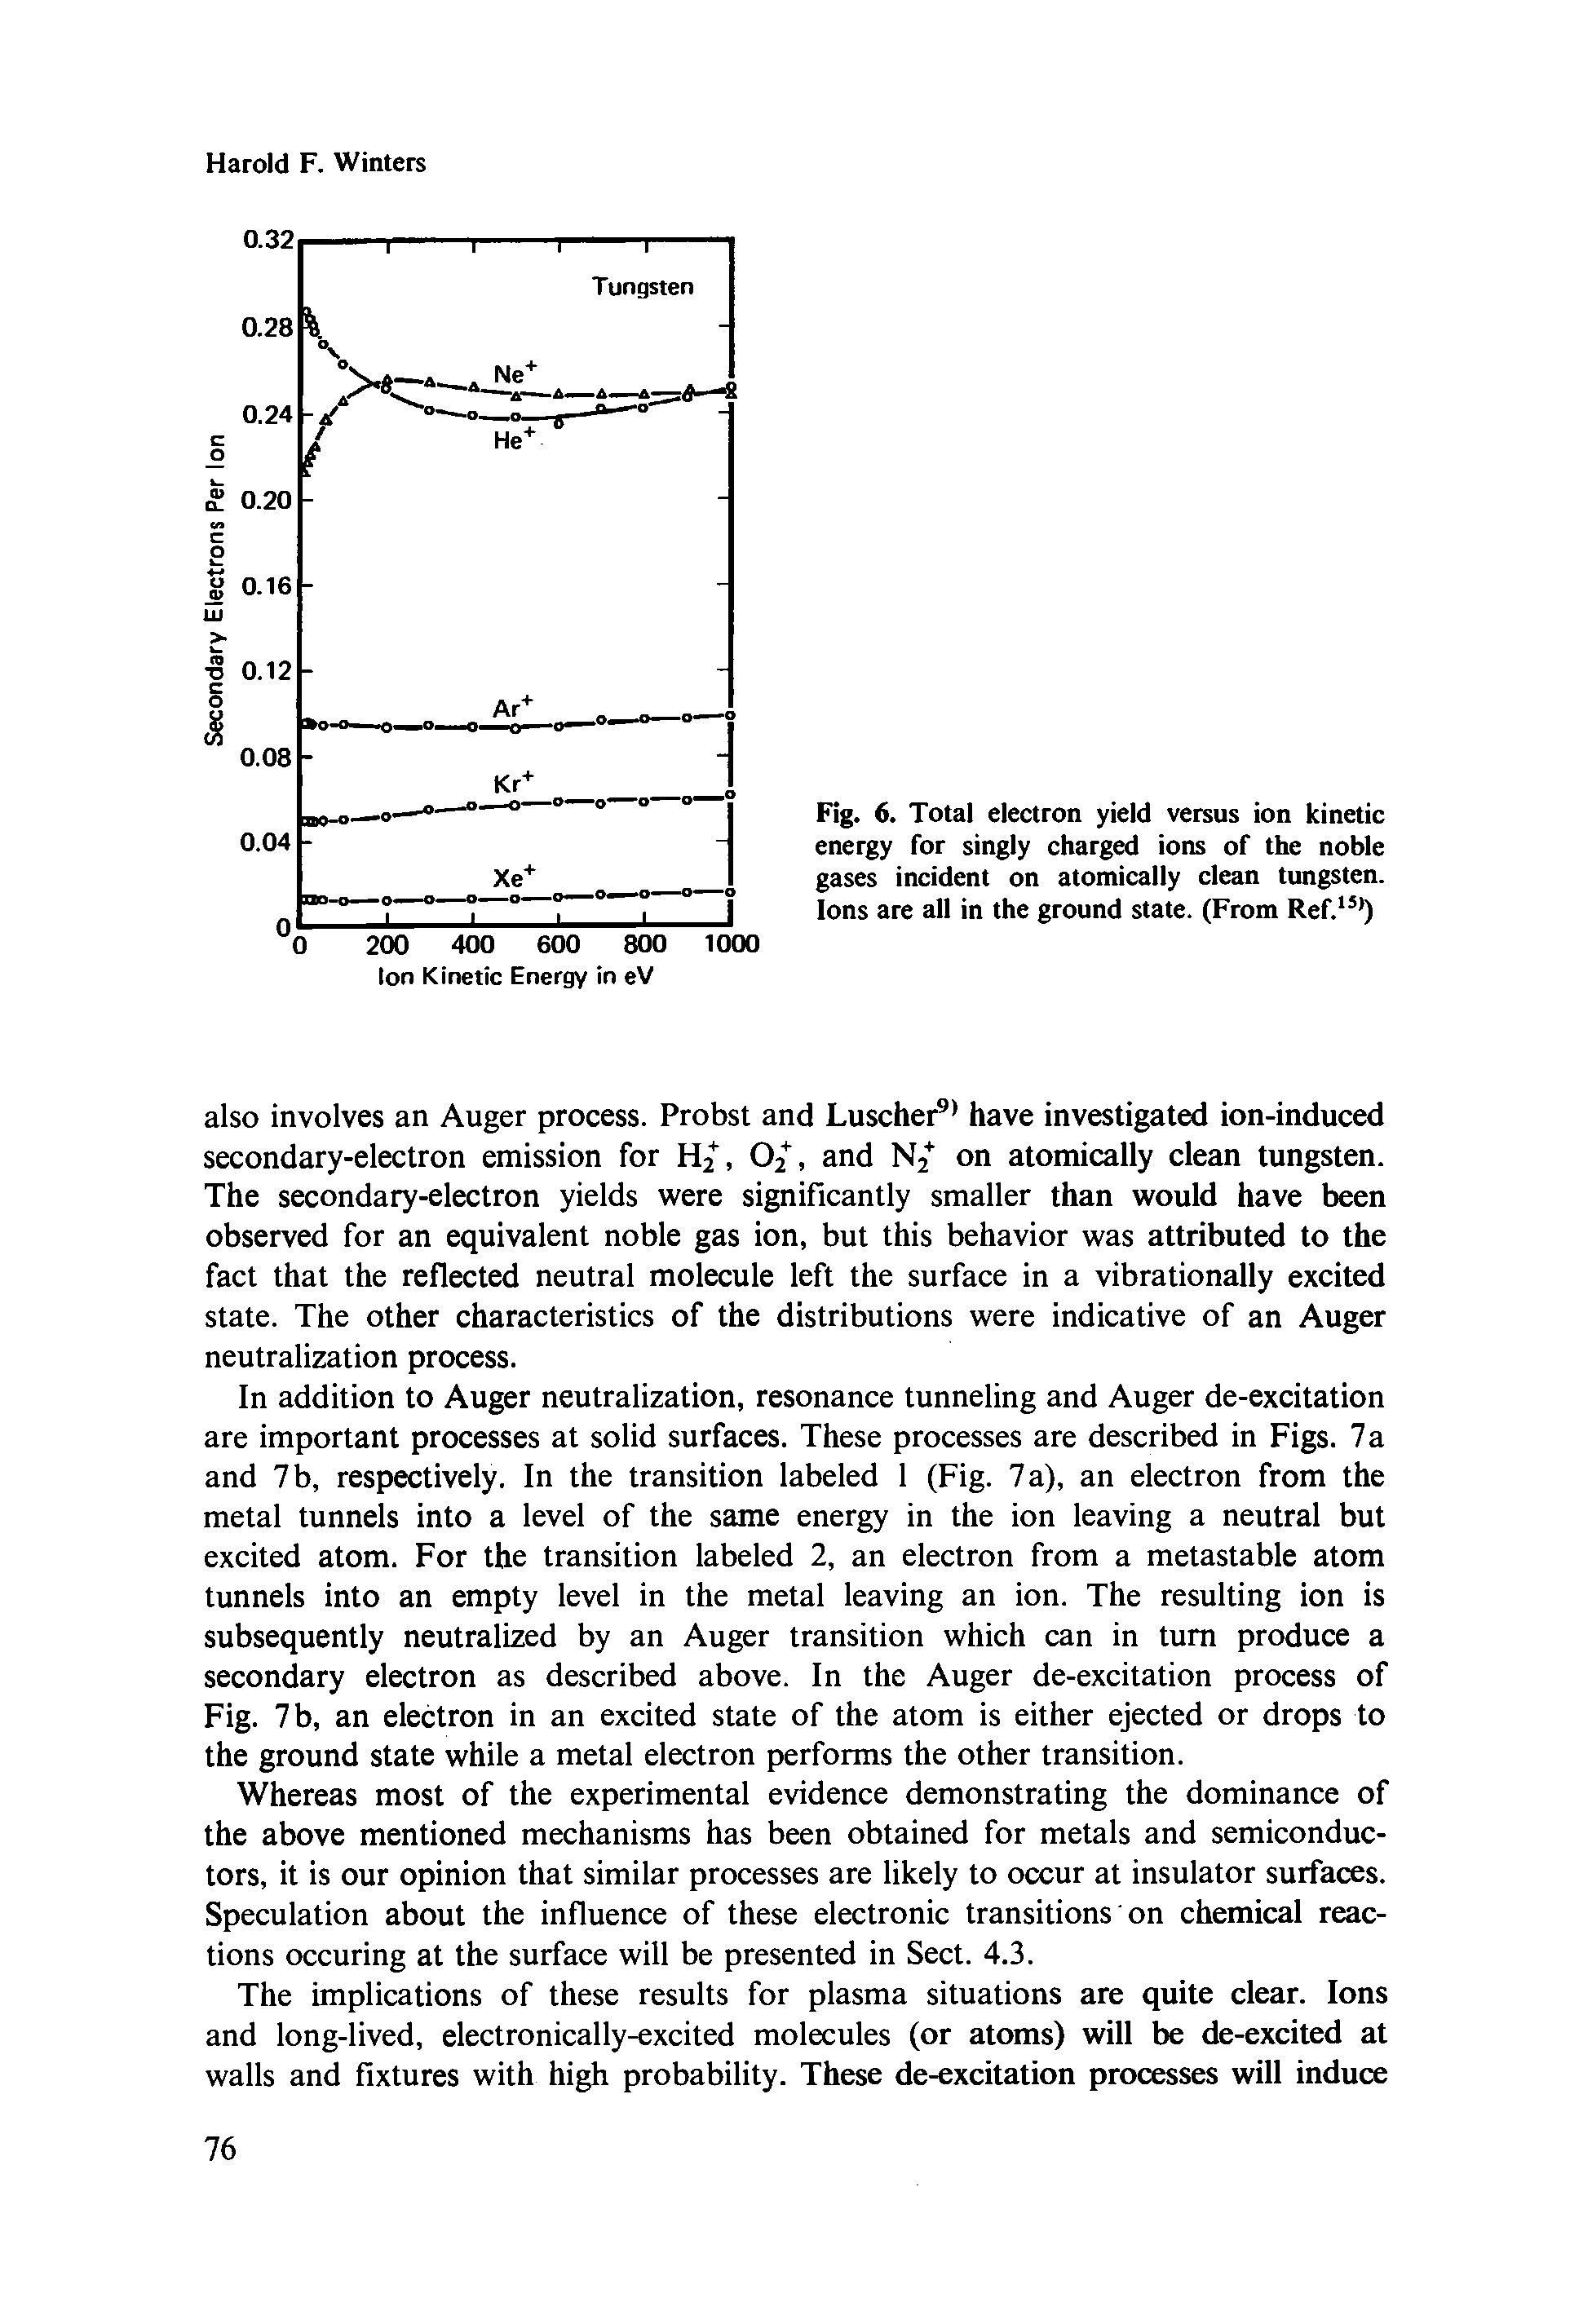 Fig. 6. Total electron yield versus ion kinetic energy for singly charged ions of the noble gases incident on atomically clean tungsten. Ions are all in the ground state. (From Ref. )...